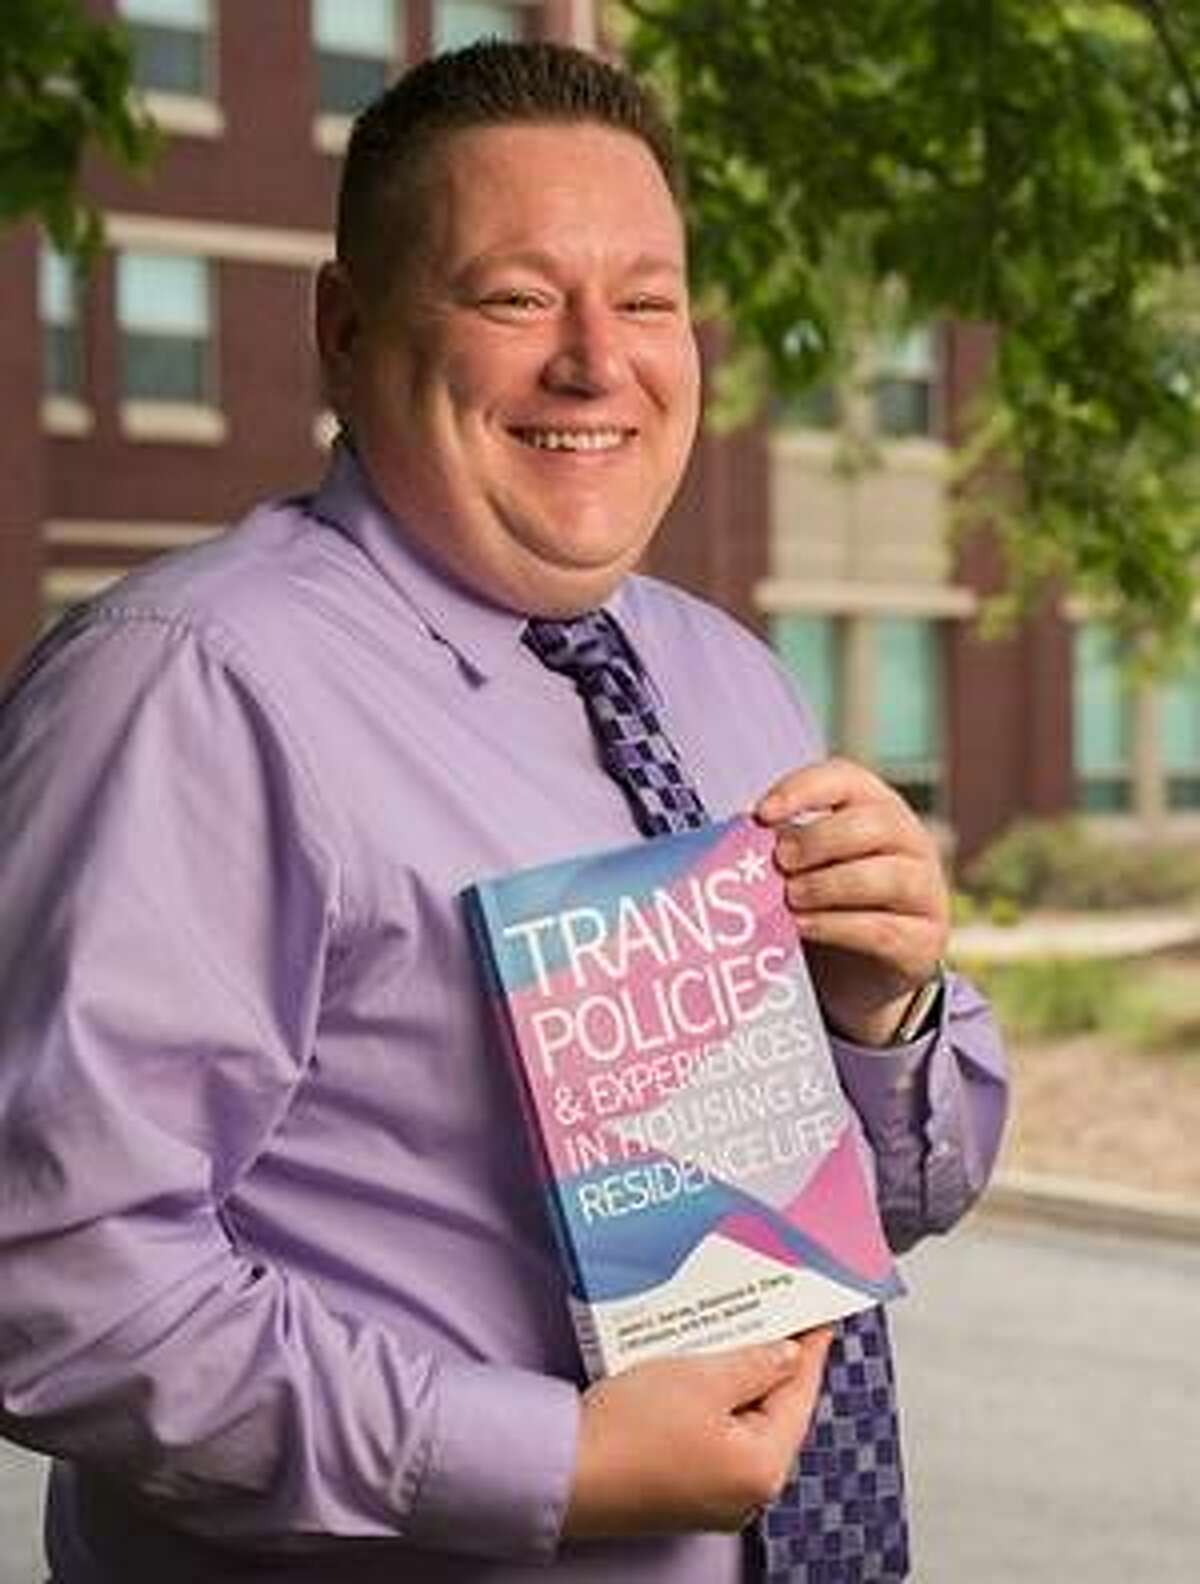 Rex Lee Jackson, SIUE associate director of Residence Life and one of four editors of the book, Trans* Policies & Experiences in Housing & Residence Life.